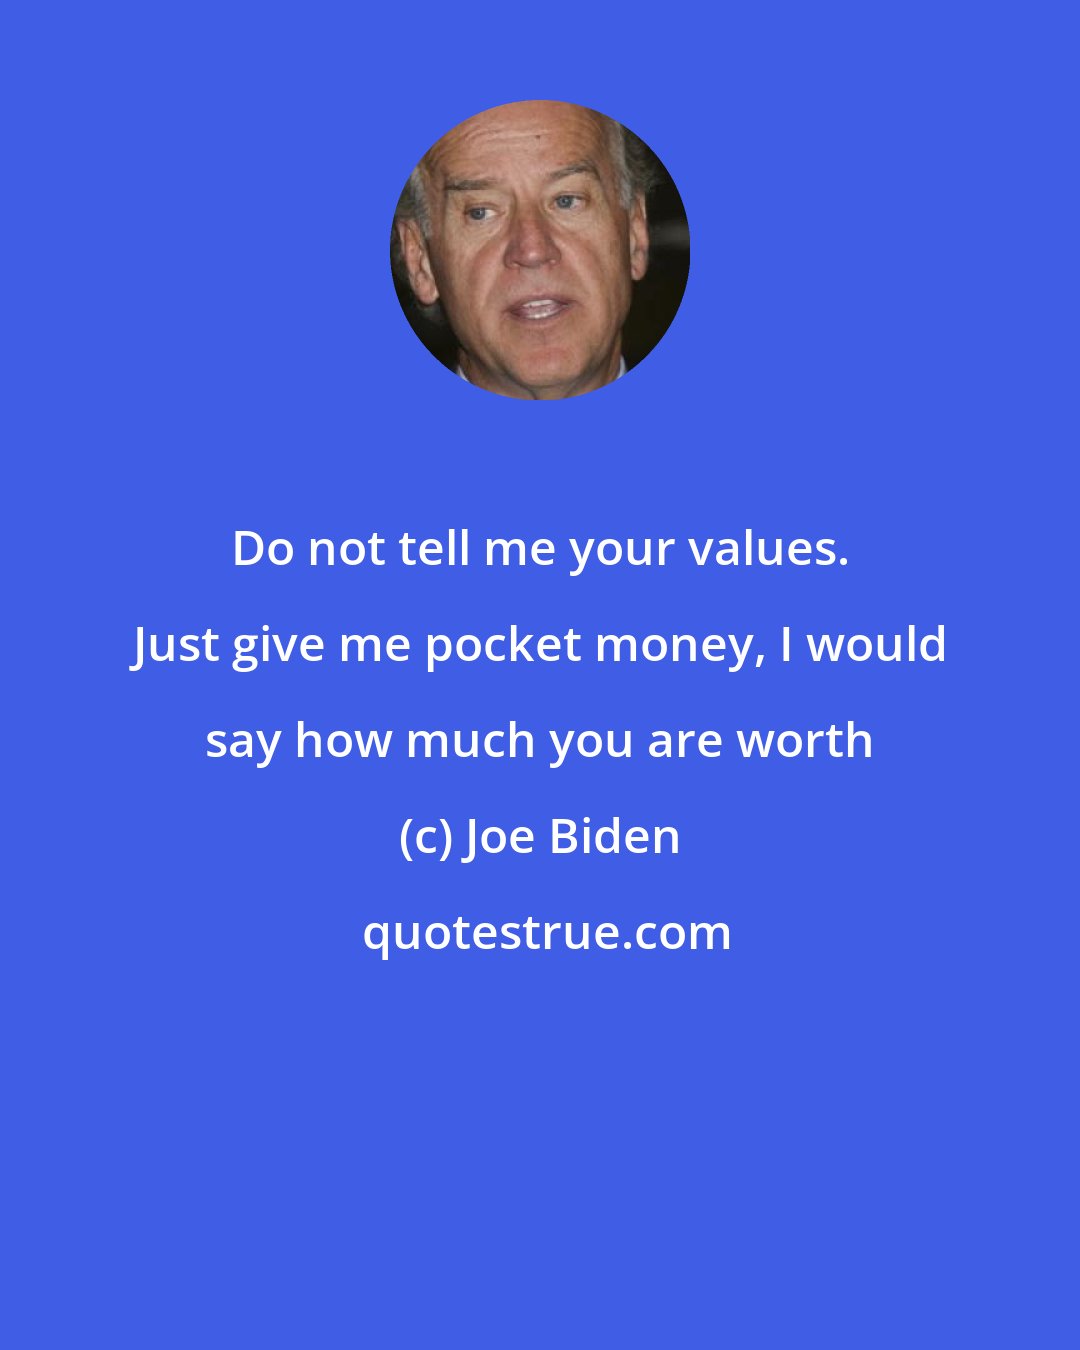 Joe Biden: Do not tell me your values​​. Just give me pocket money, I would say how much you are worth